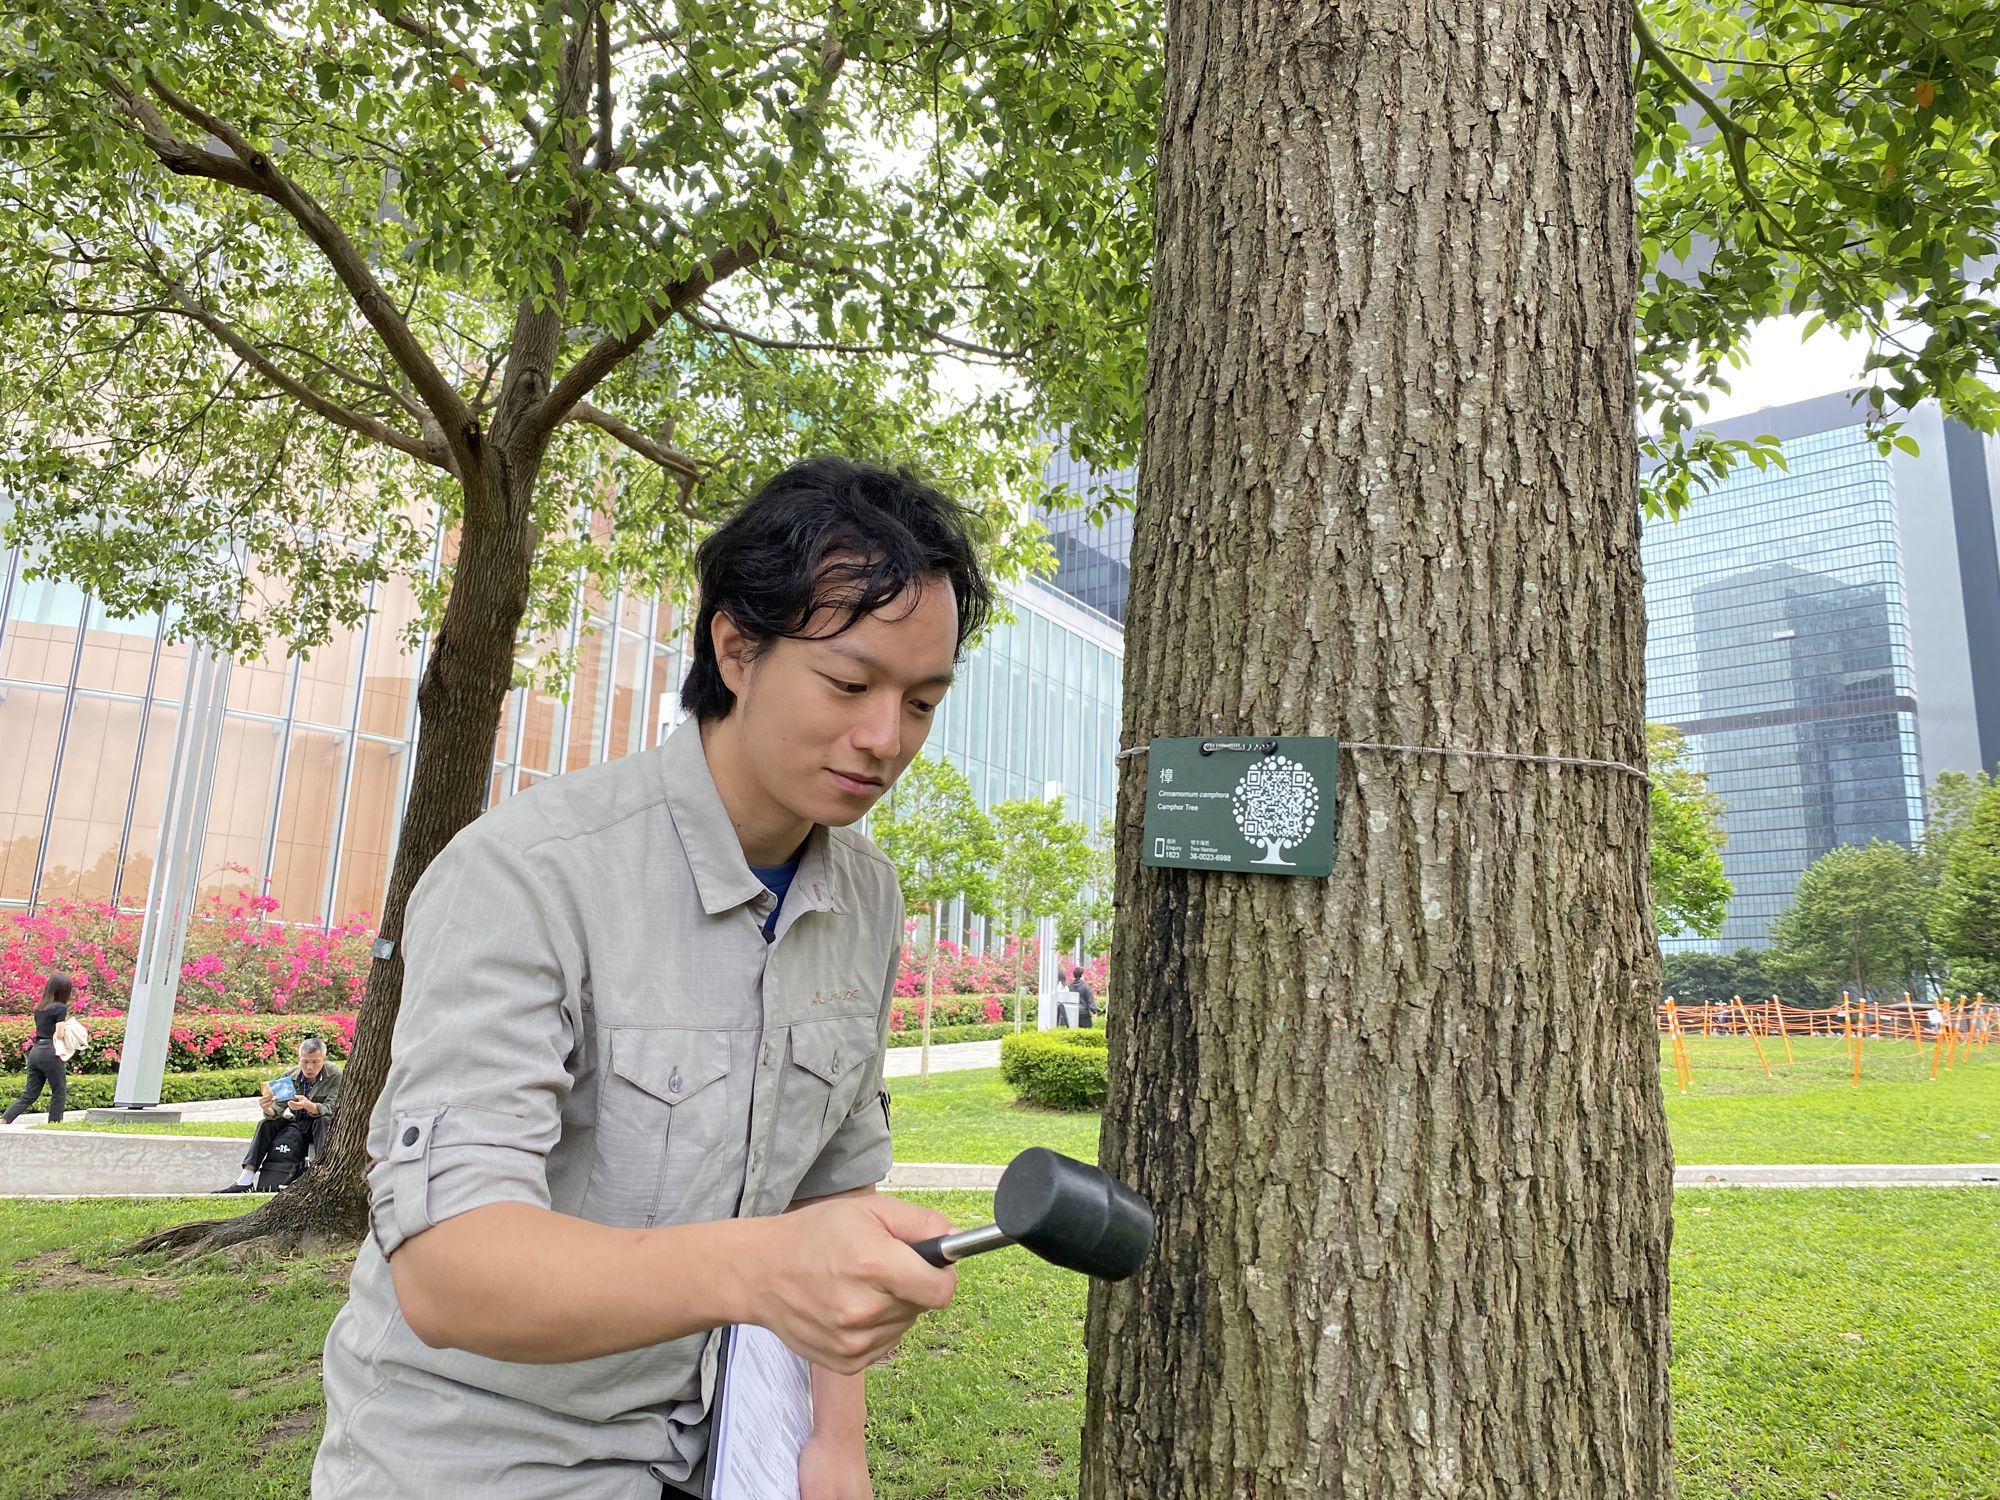 Field Officer (Tree Management) of the GLTMS of the DEVB, Mr LAW Po-ching, is demonstrating the use of an ancillary tool (e.g. plastic mallet) to tap the trunk to assess its structural condition.